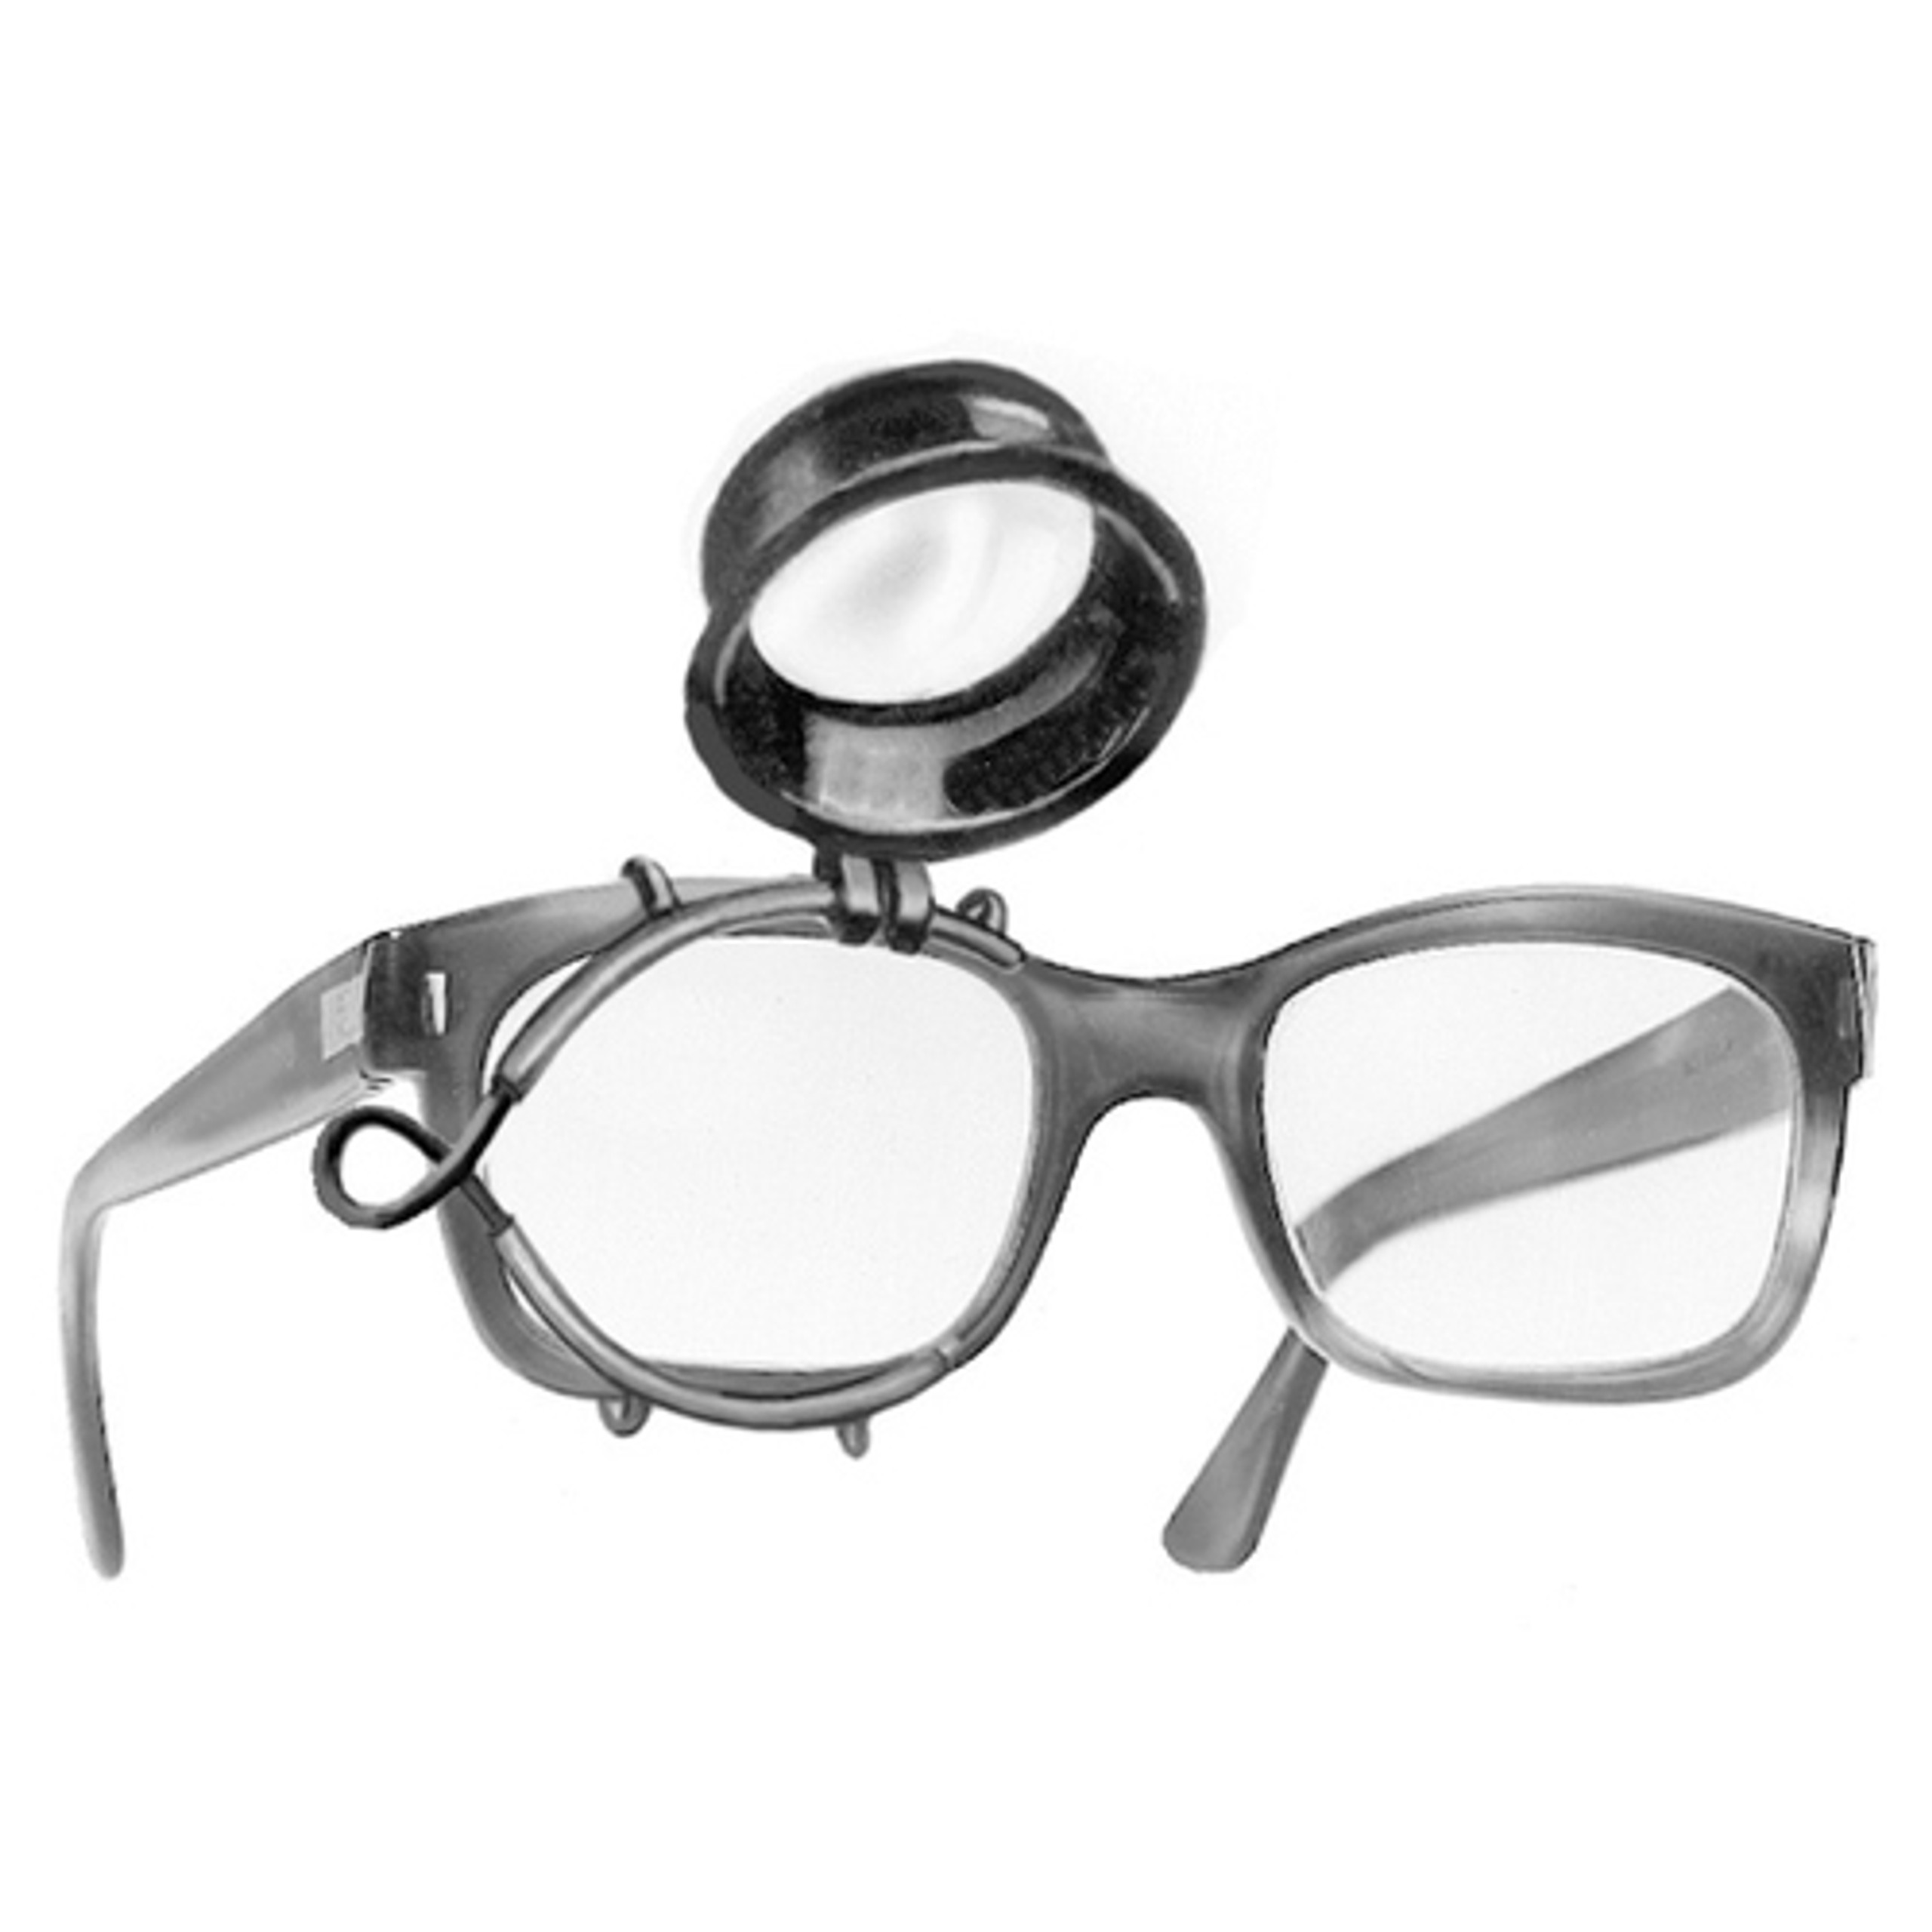 Bergeon Magnifiers